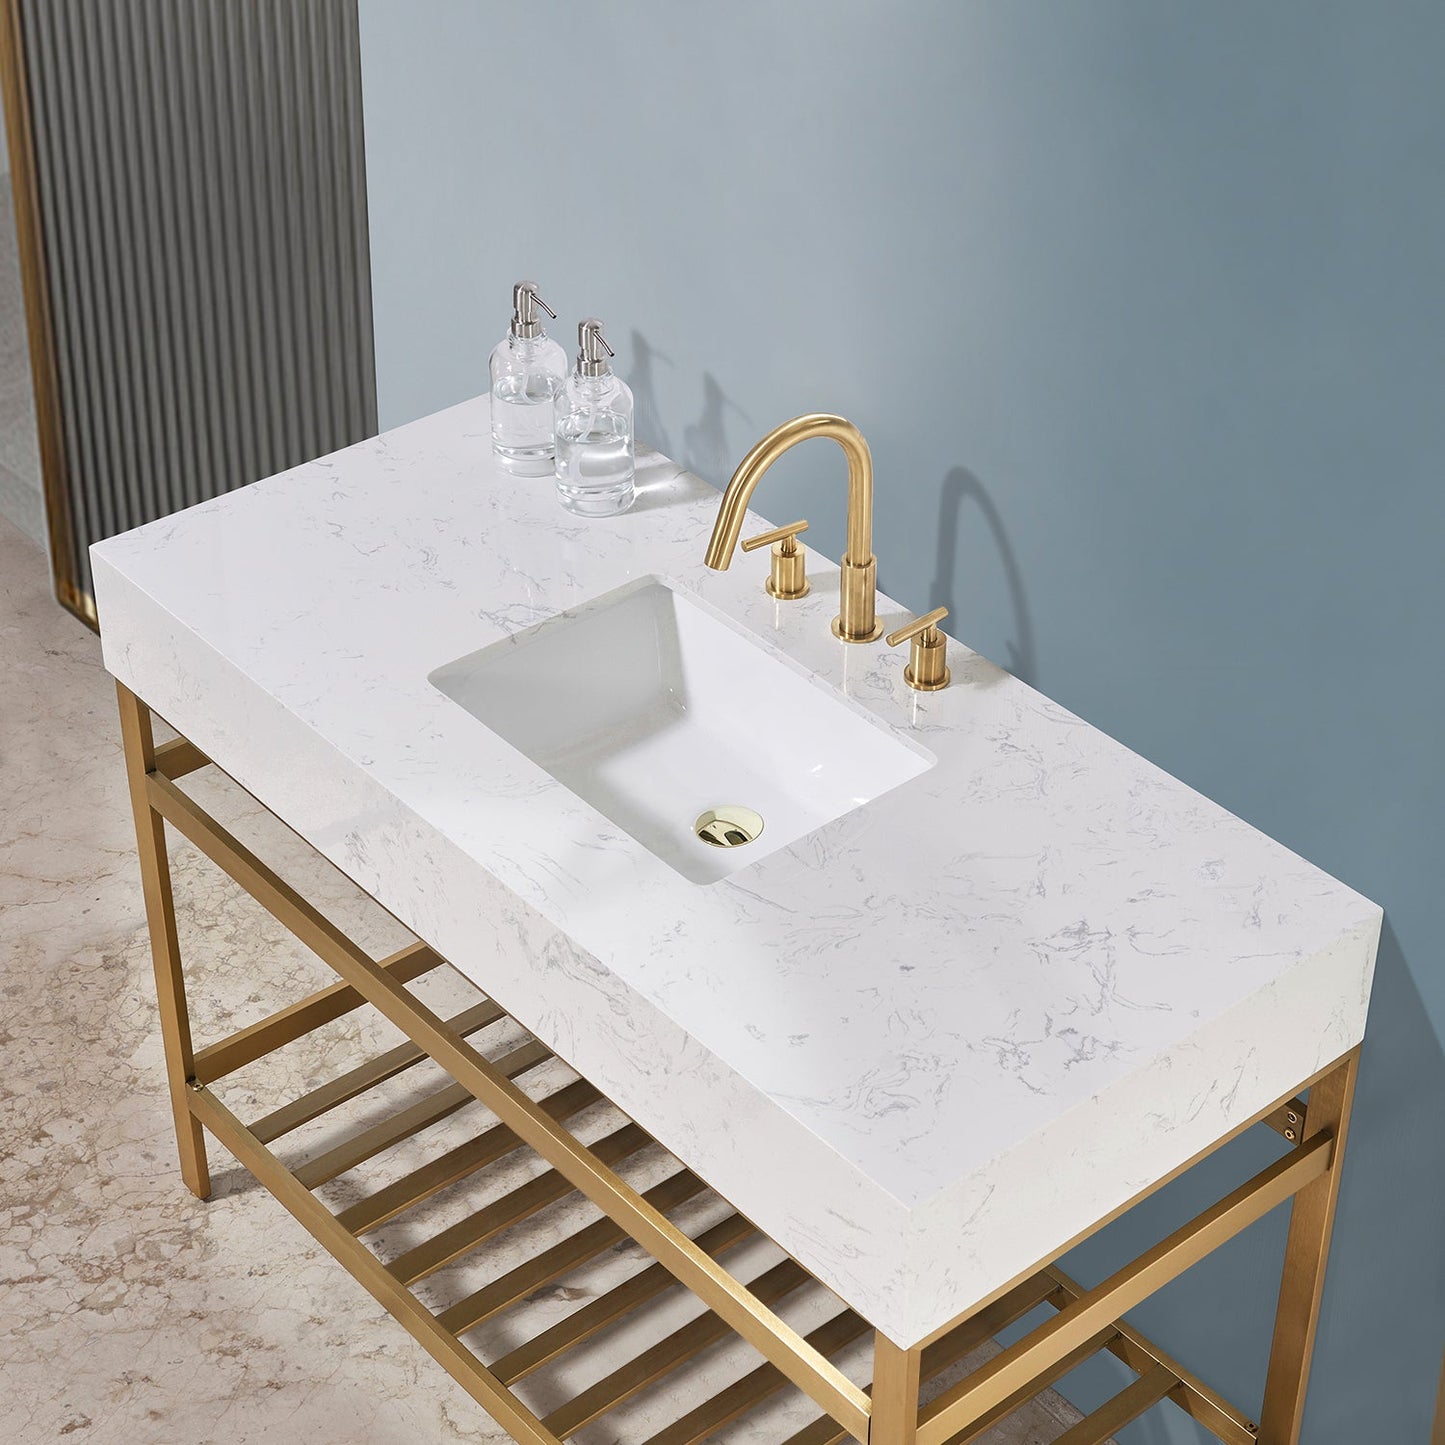 Merano 48" Single Stainless Steel Vanity Console in Brushed Gold with Aosta White Stone Countertop without Mirror